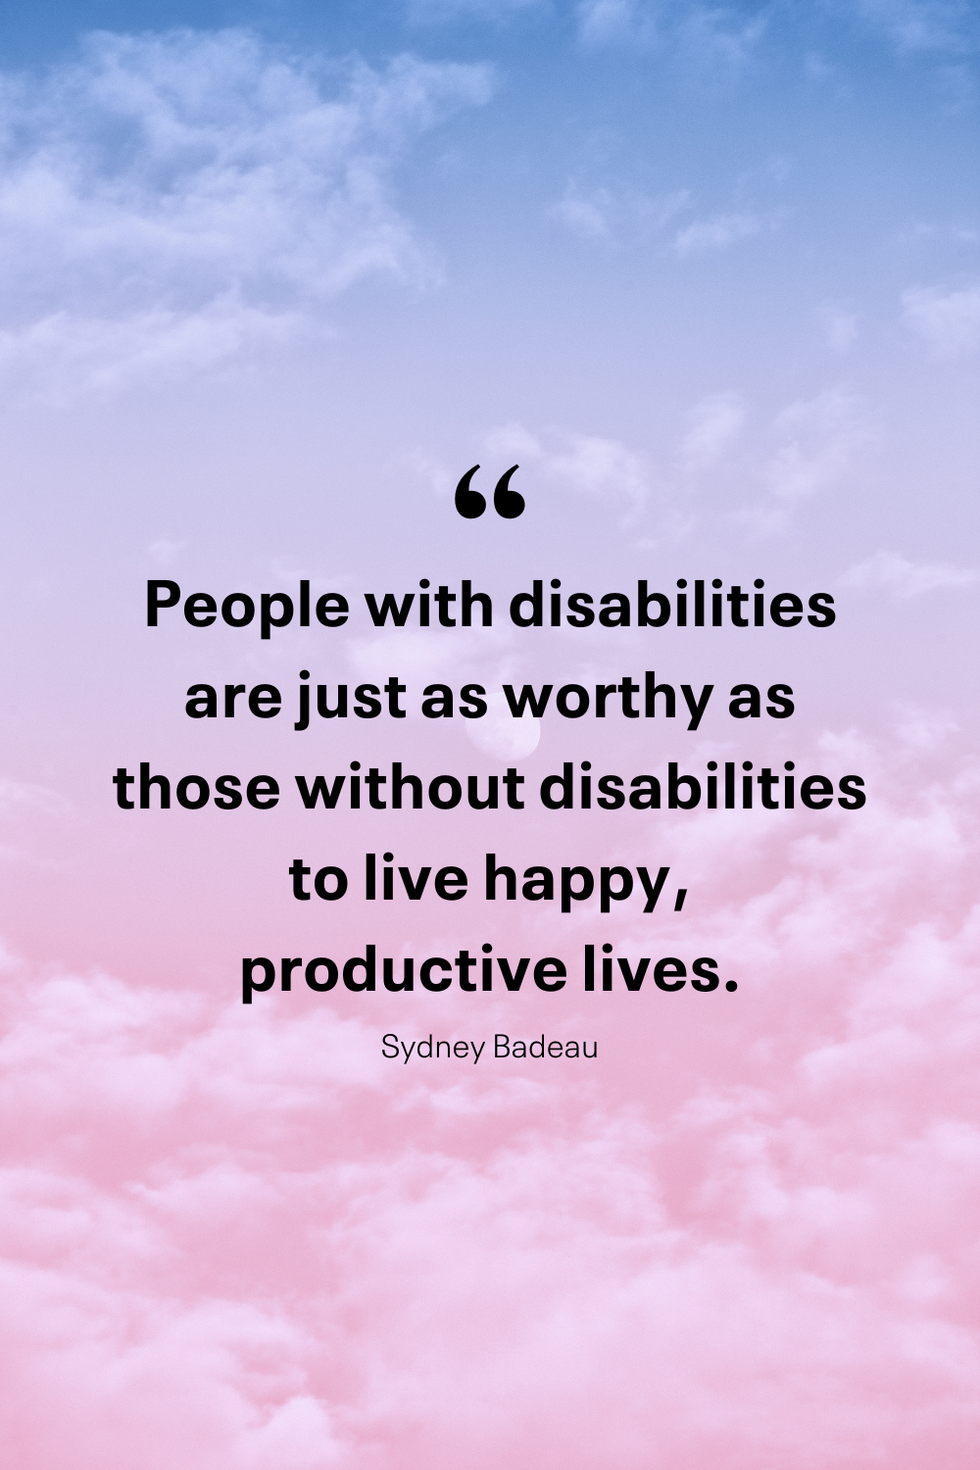 people with disabilities are just as worthy as those without disabilities to live happy, productive lives, sydney badeau